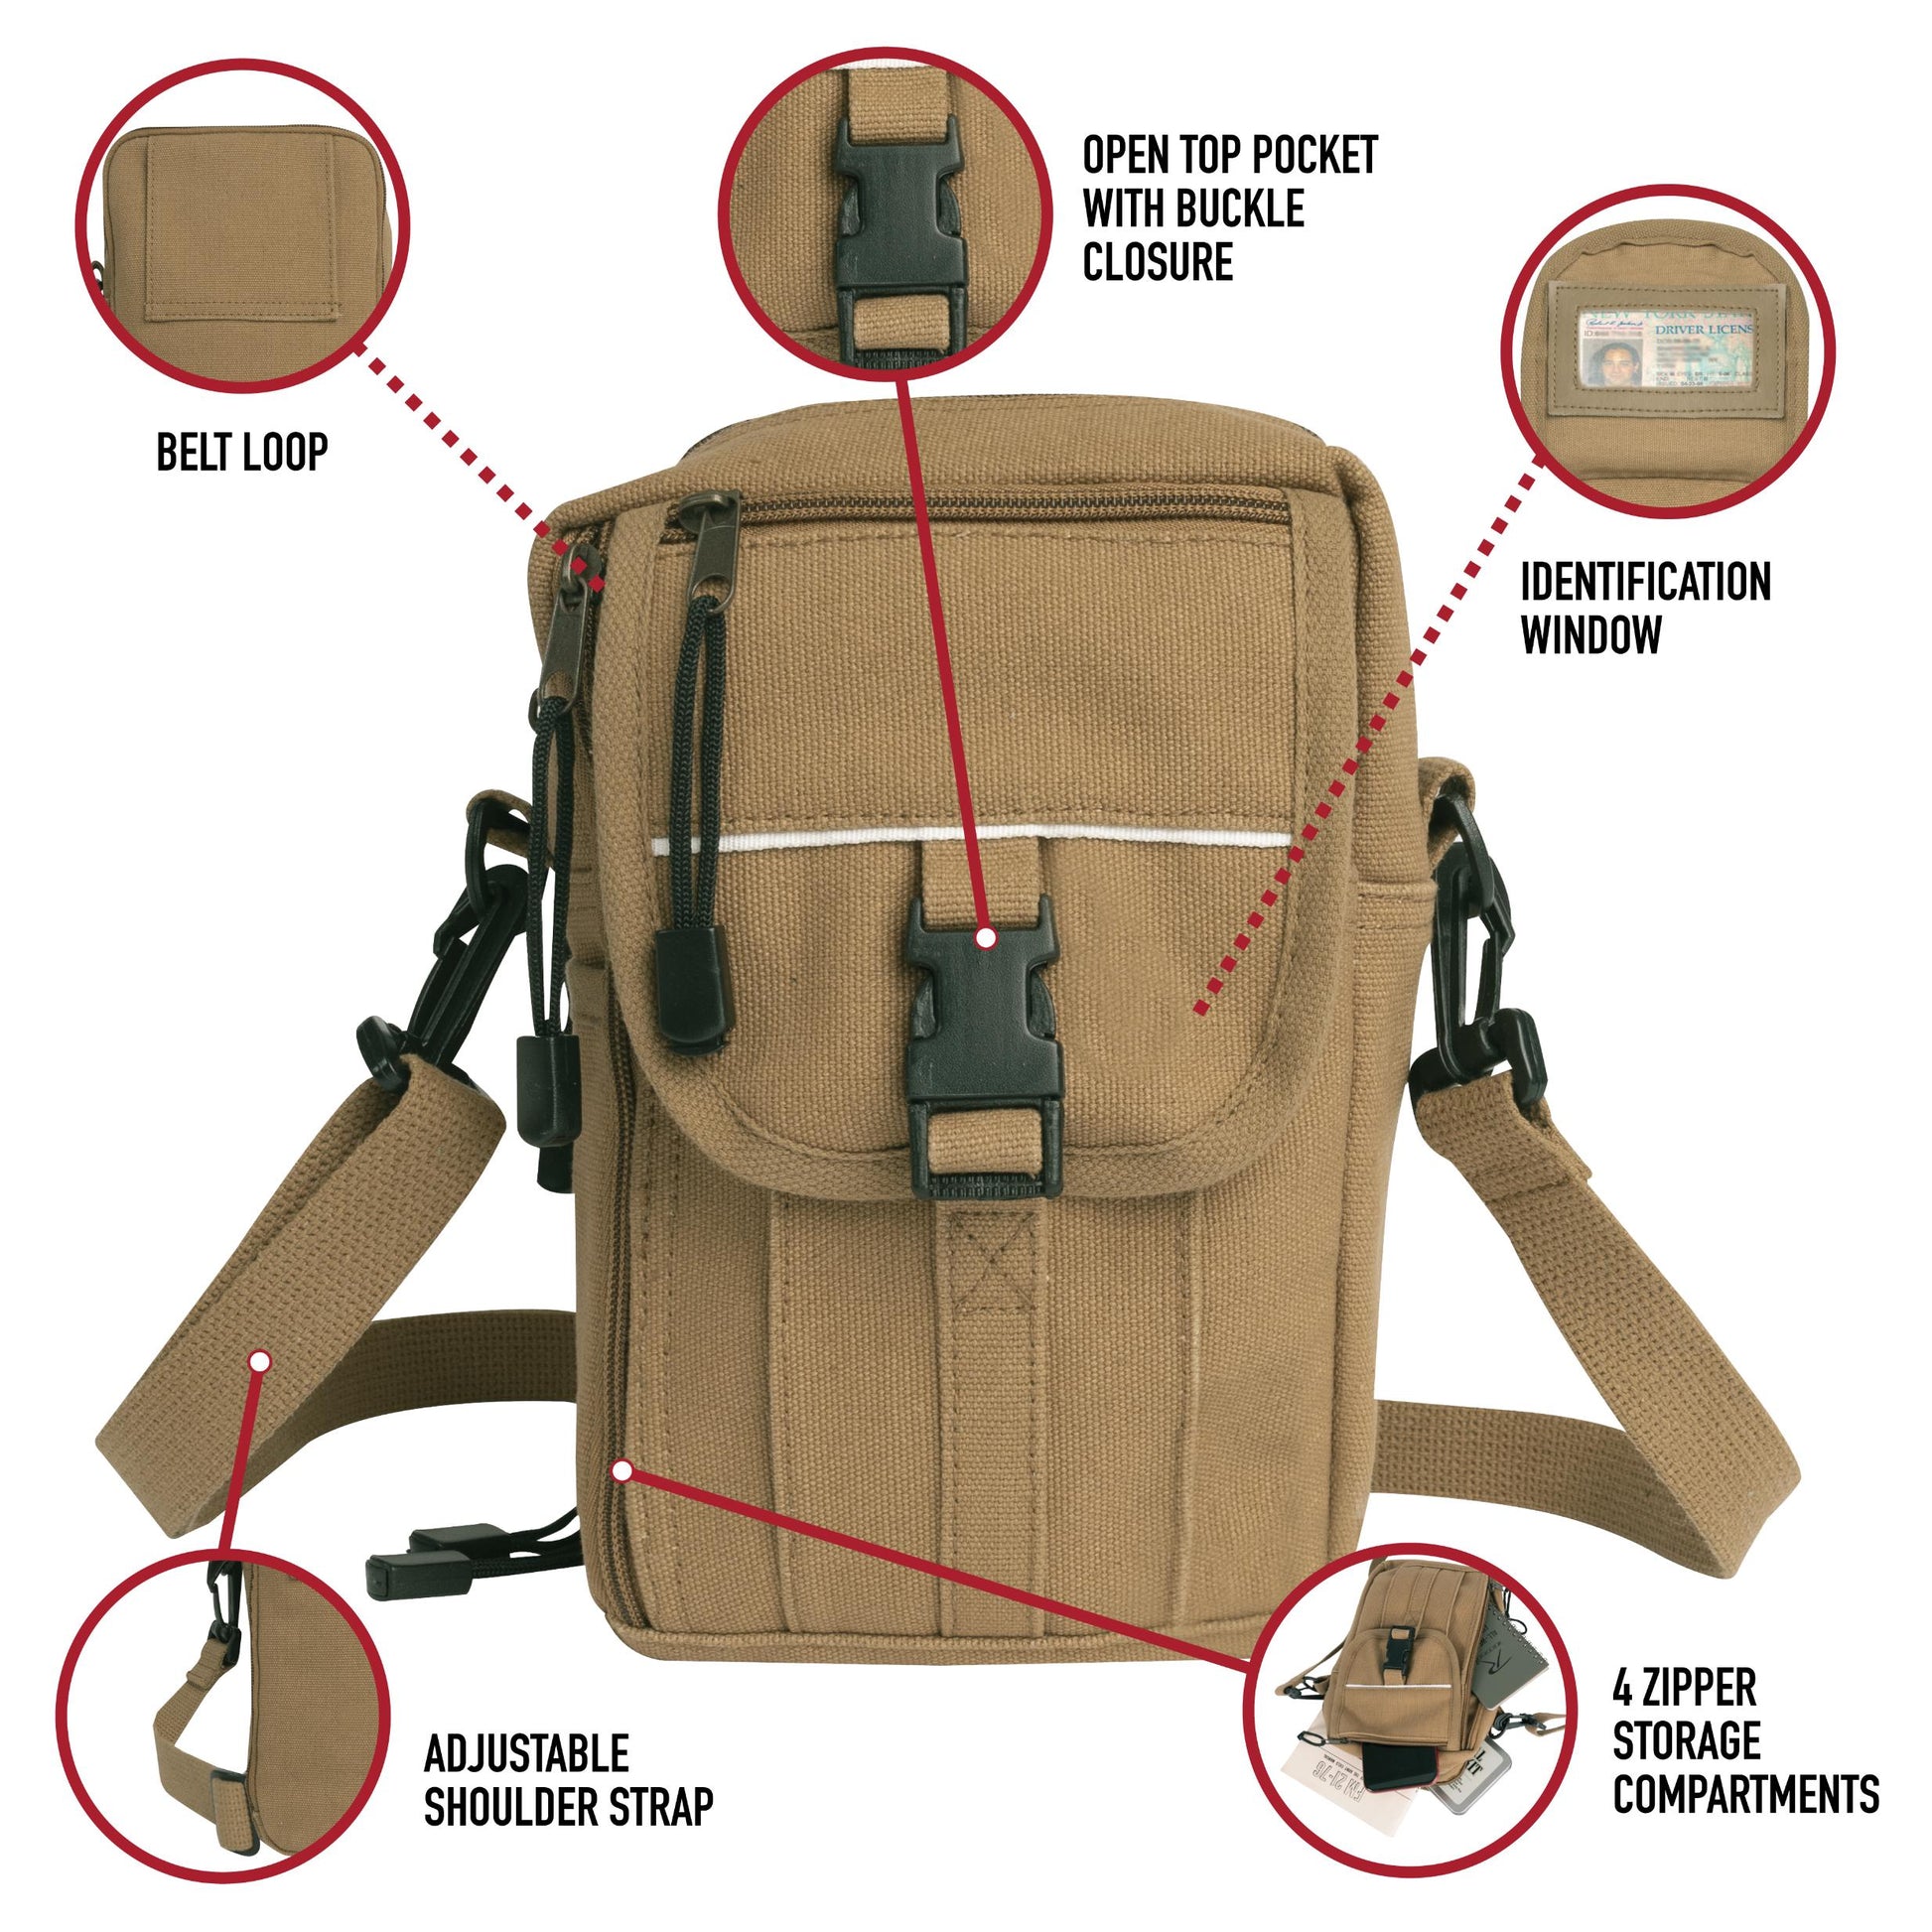 Rothco Heavyweight Classic Canvas Passport Travel Pouch - Tactical Choice Plus